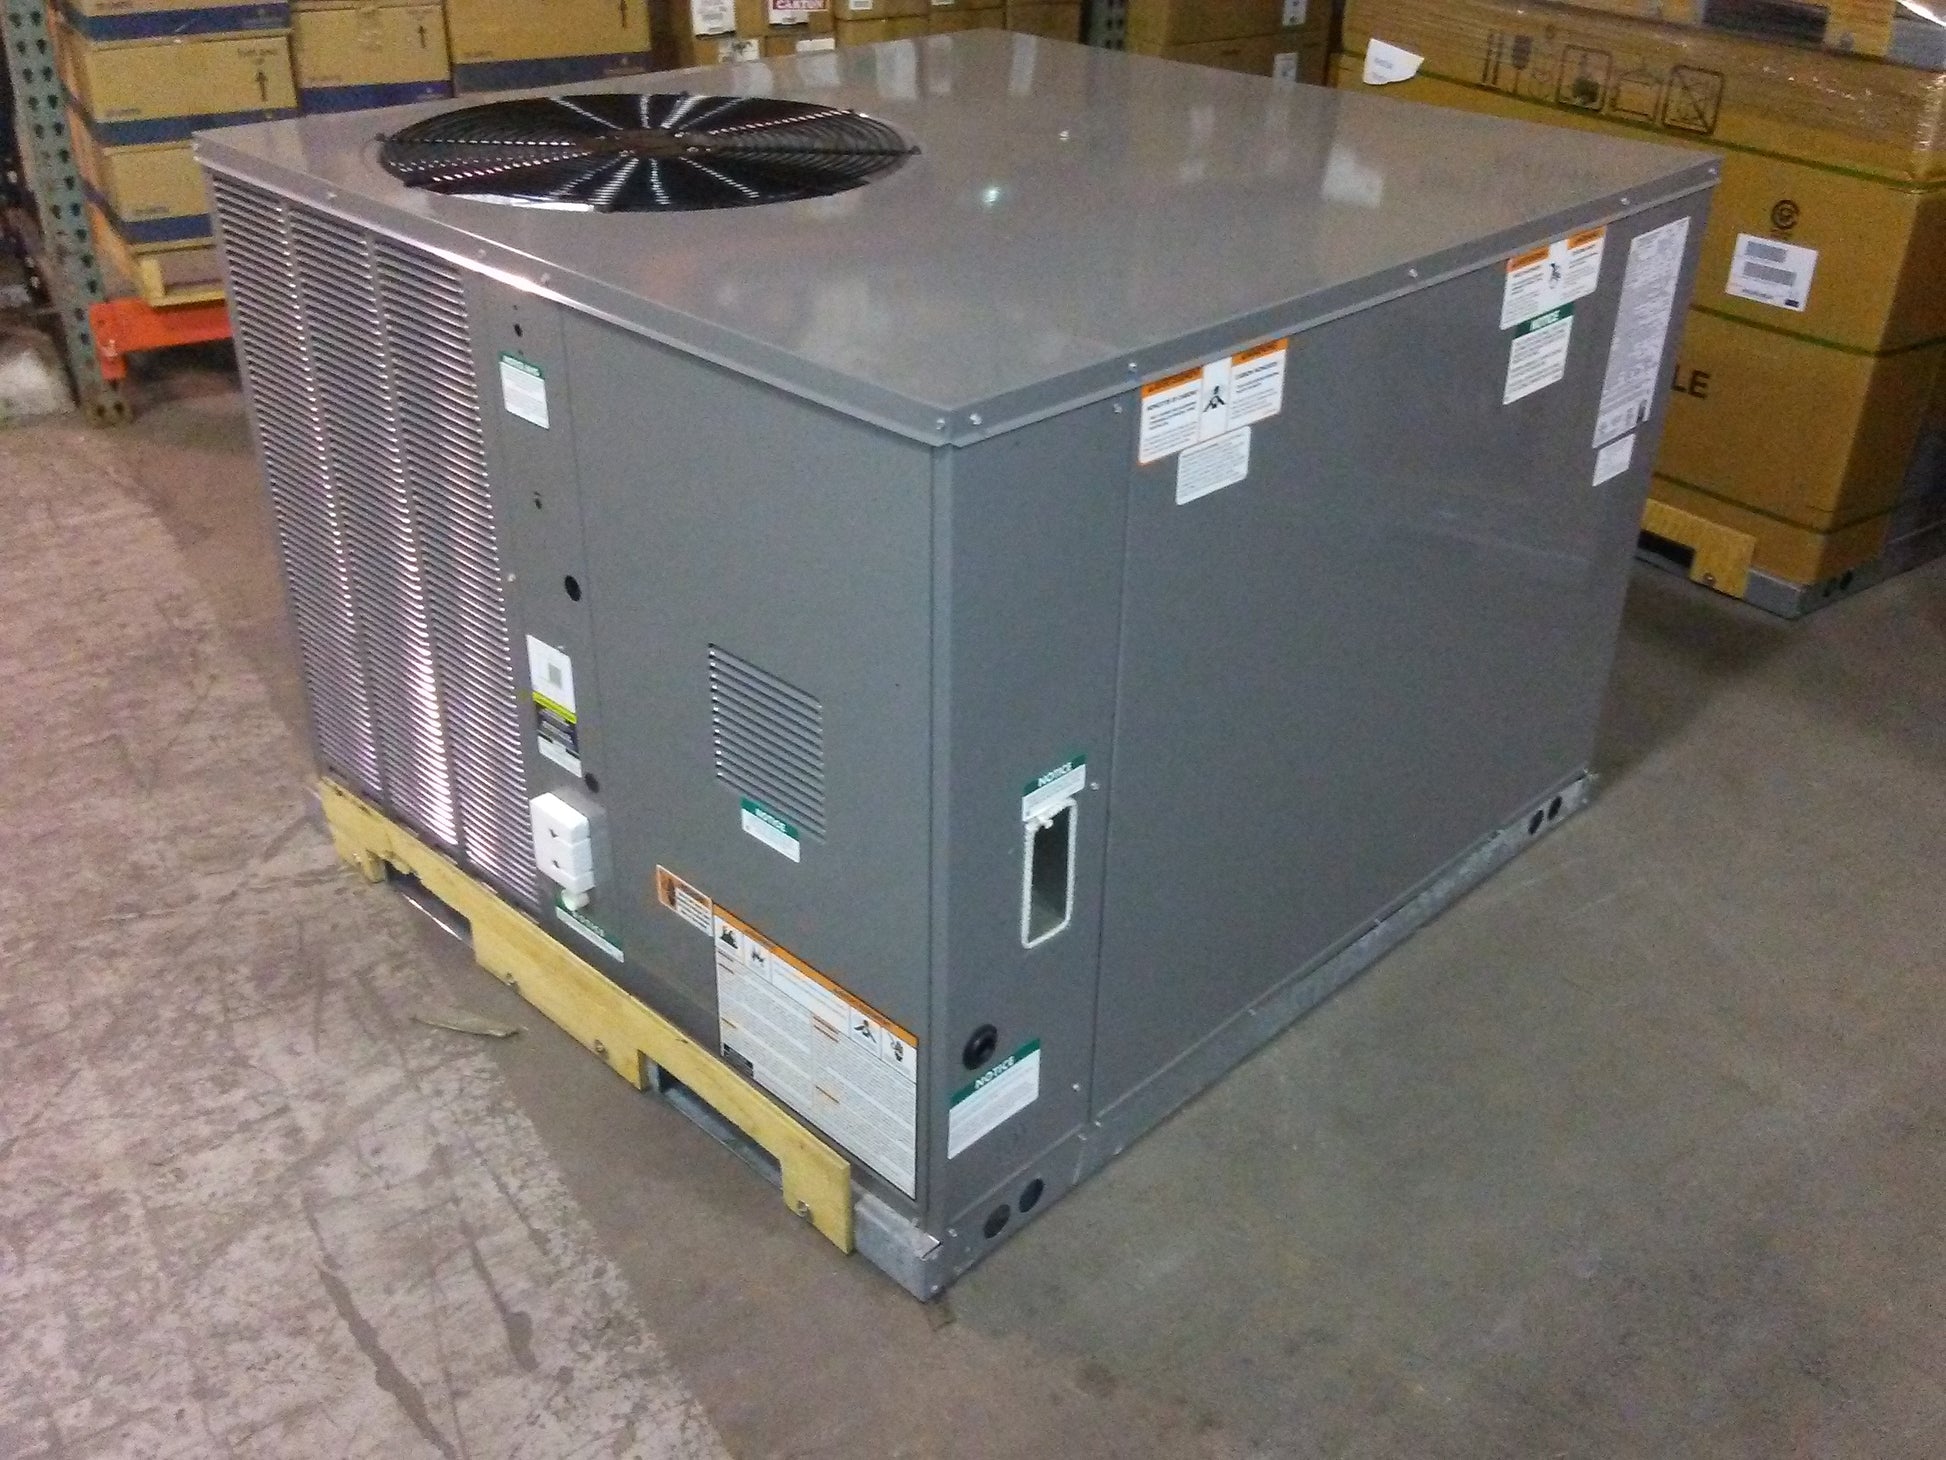 3 TON CONVERTIBLE GAS/ELECTRIC PACKAGED UNIT 13 SEER 460/60/3 R-410A